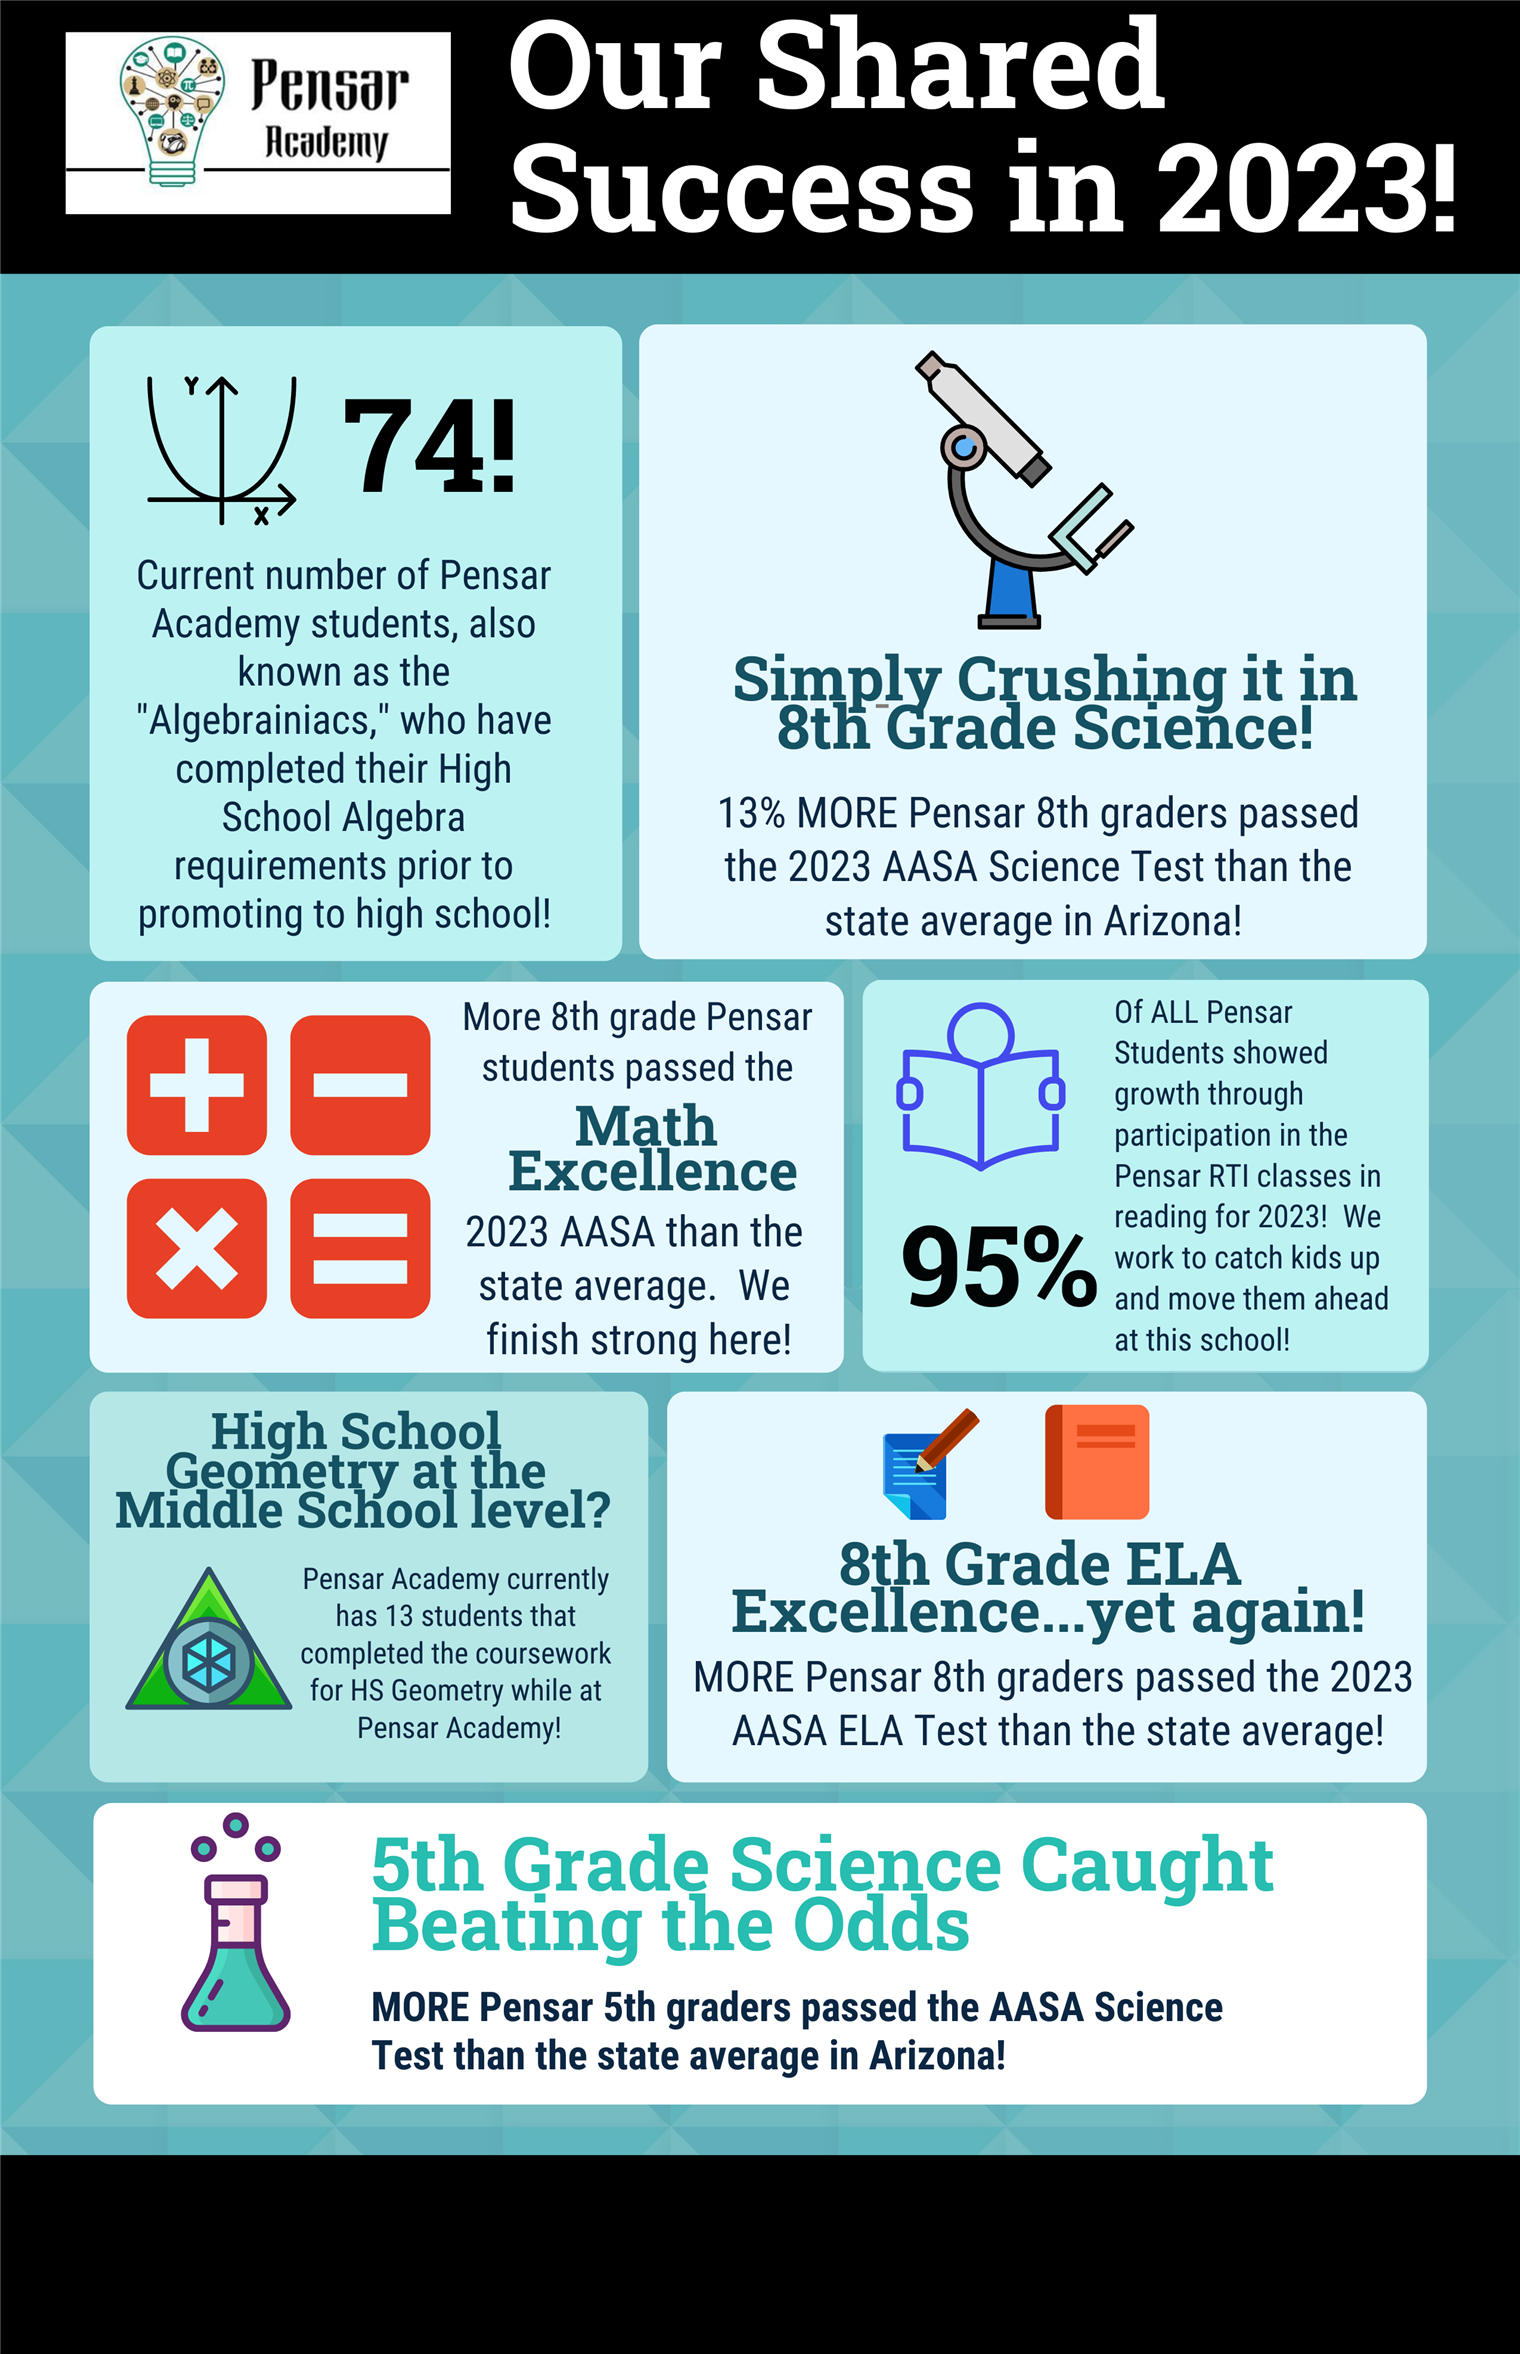 Infographic that highlights the success of the school for 2023!